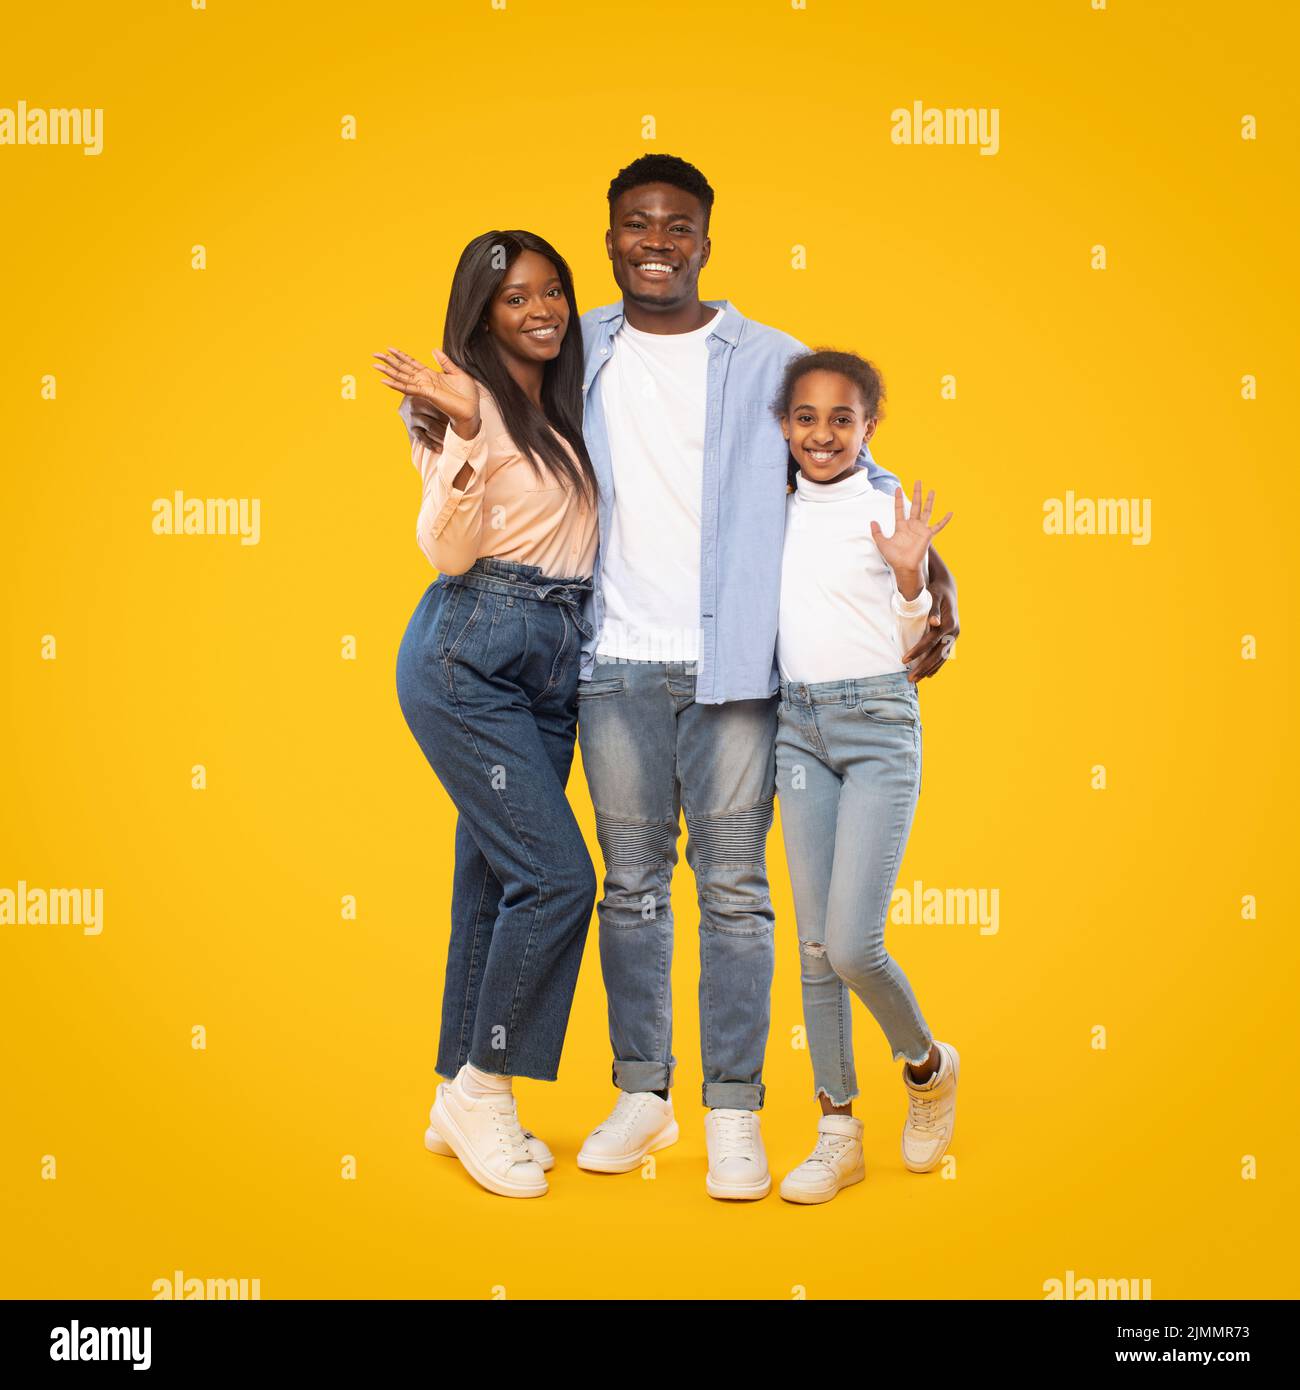 Portrait of happy african american family of man, woman and girl waving hands while posing over yellow background Stock Photo